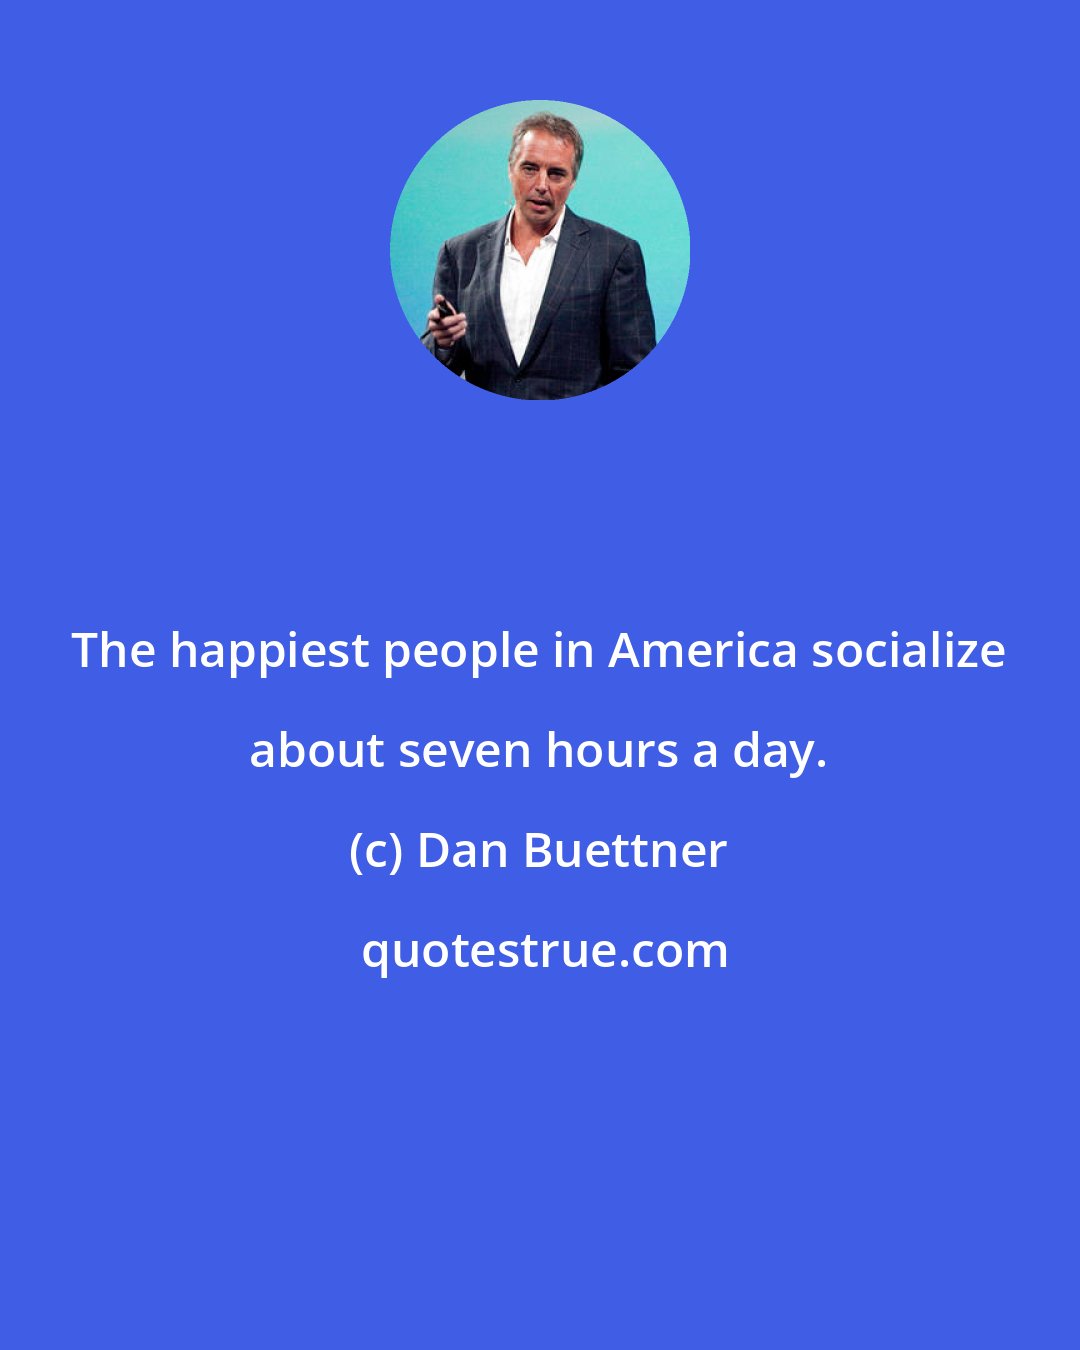 Dan Buettner: The happiest people in America socialize about seven hours a day.